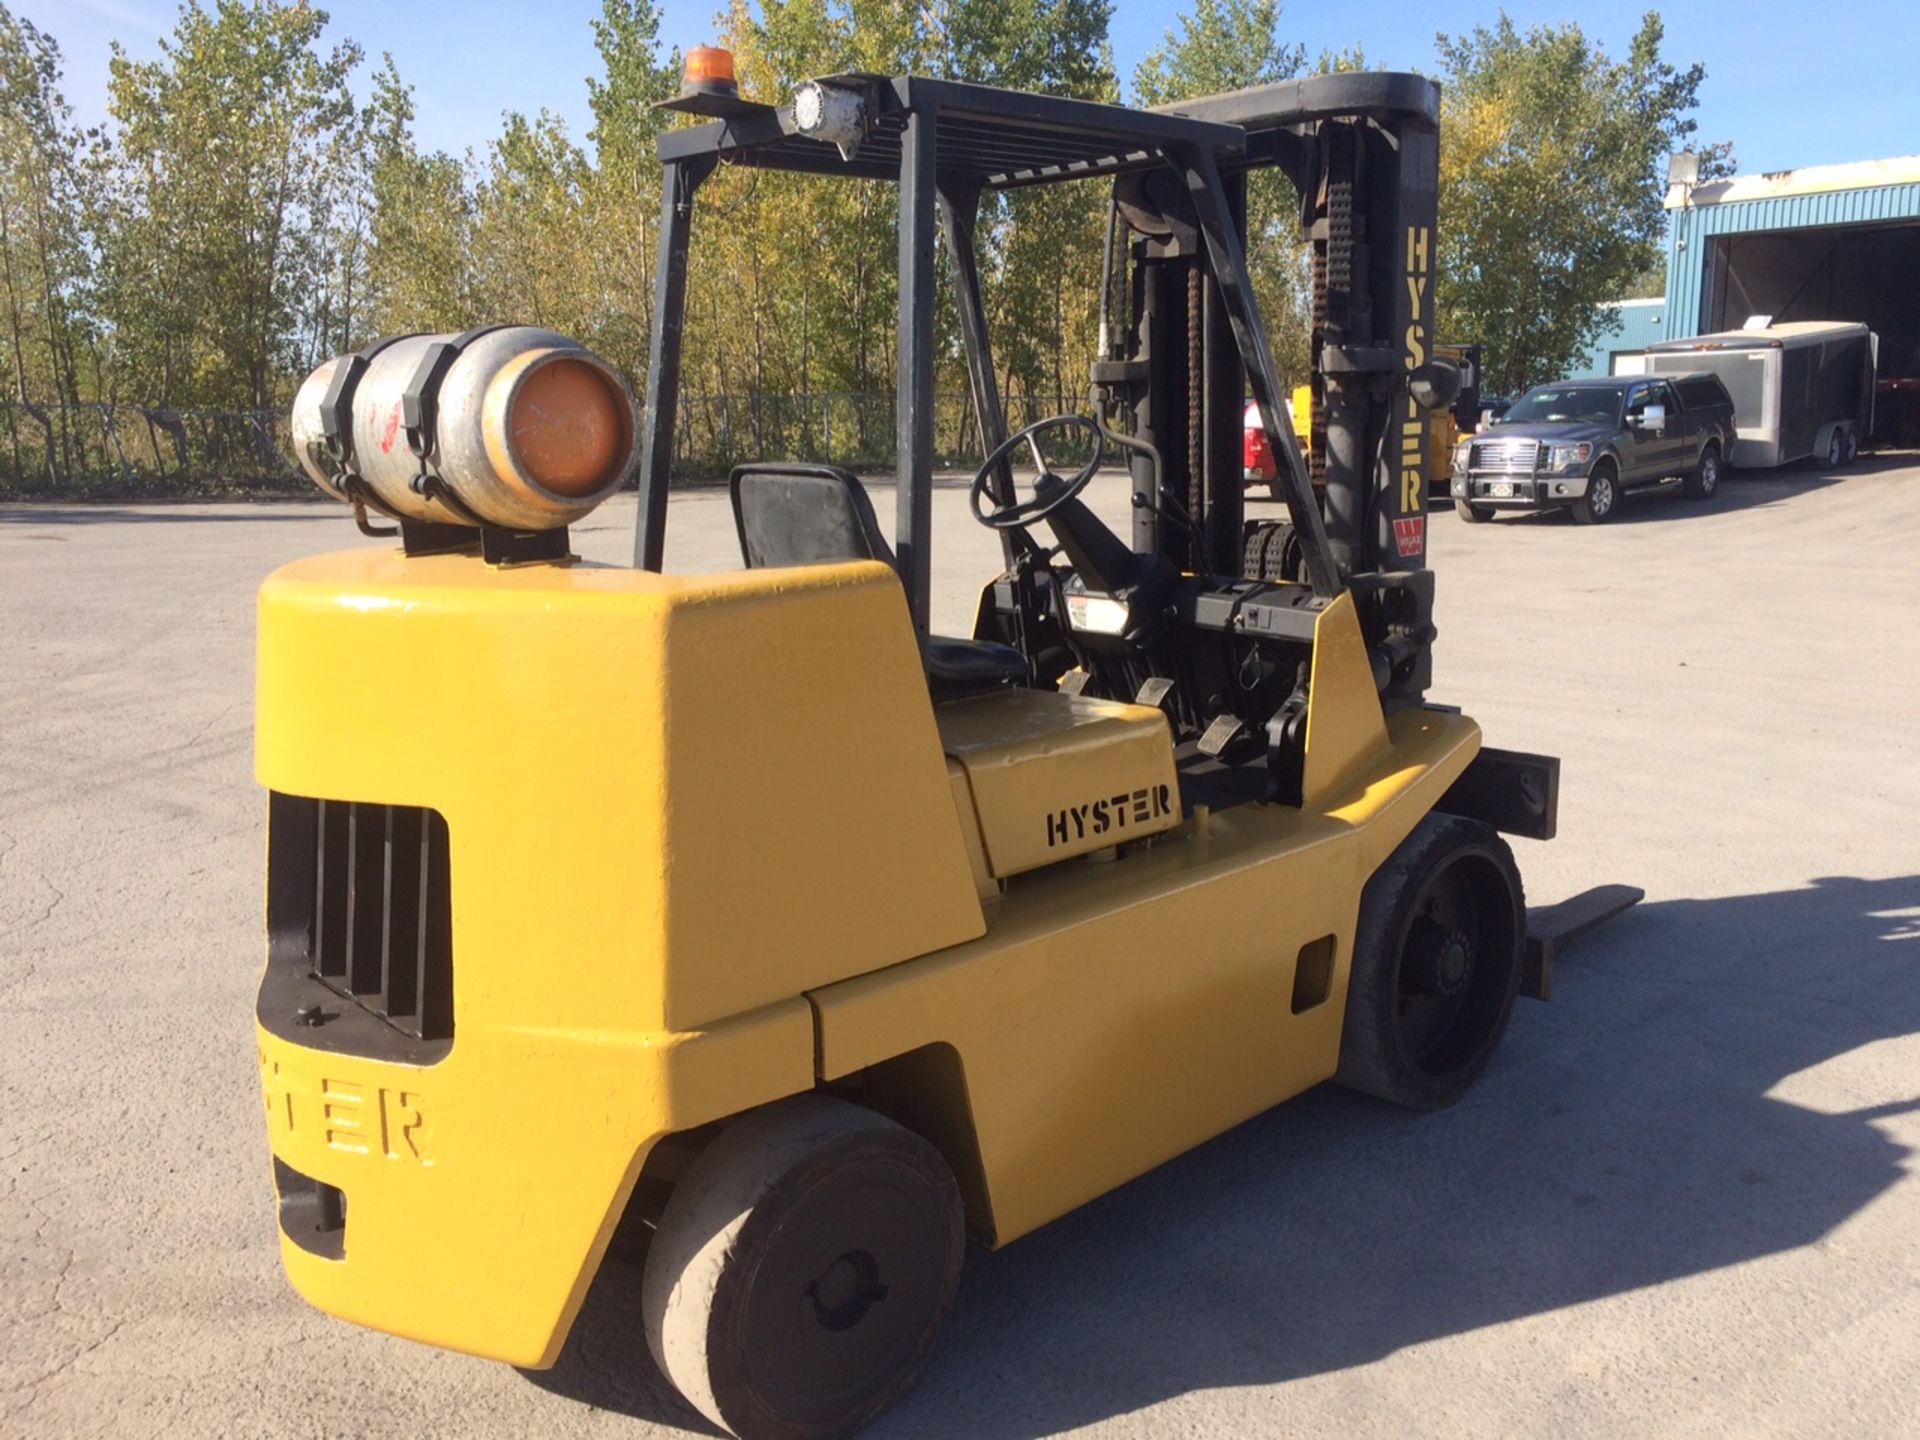 HYSTER 15 000 LBS PROPANE FORKLIFT MOD. S155XL, 161" HEIGHT, 3286 HOURS, S/N: B024D04082T - Image 4 of 6